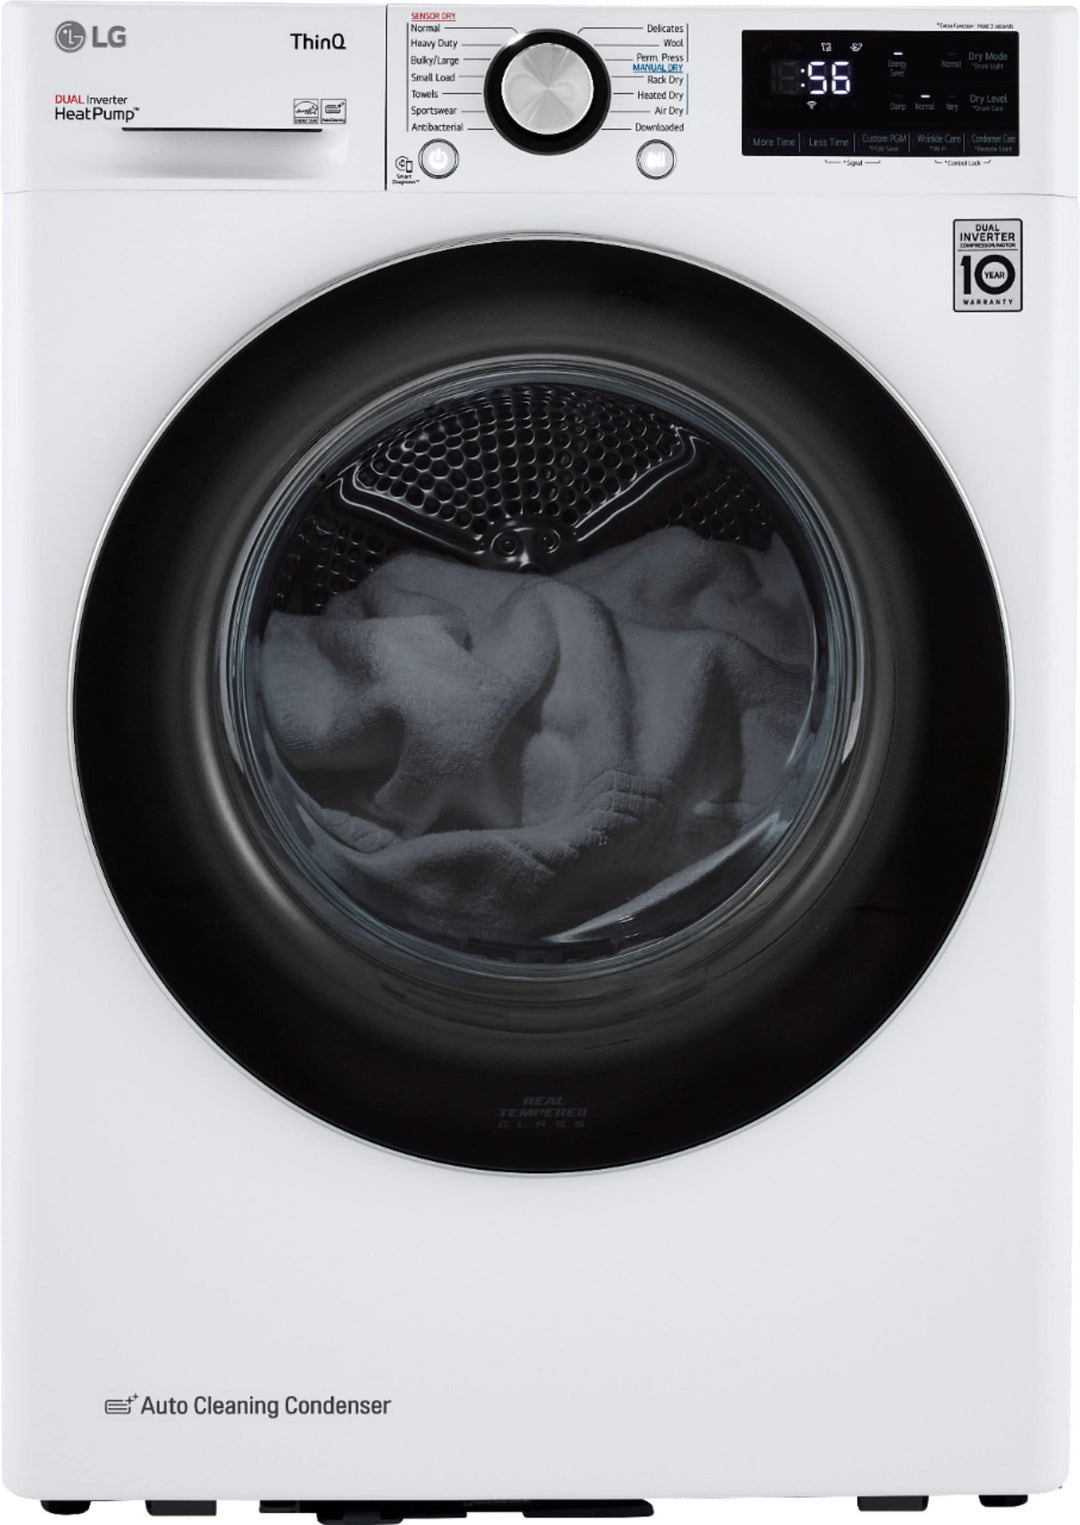 LG - 4.2 cu ft Stackable Electric Dryer with Dual Inverter HeatPump - White_0